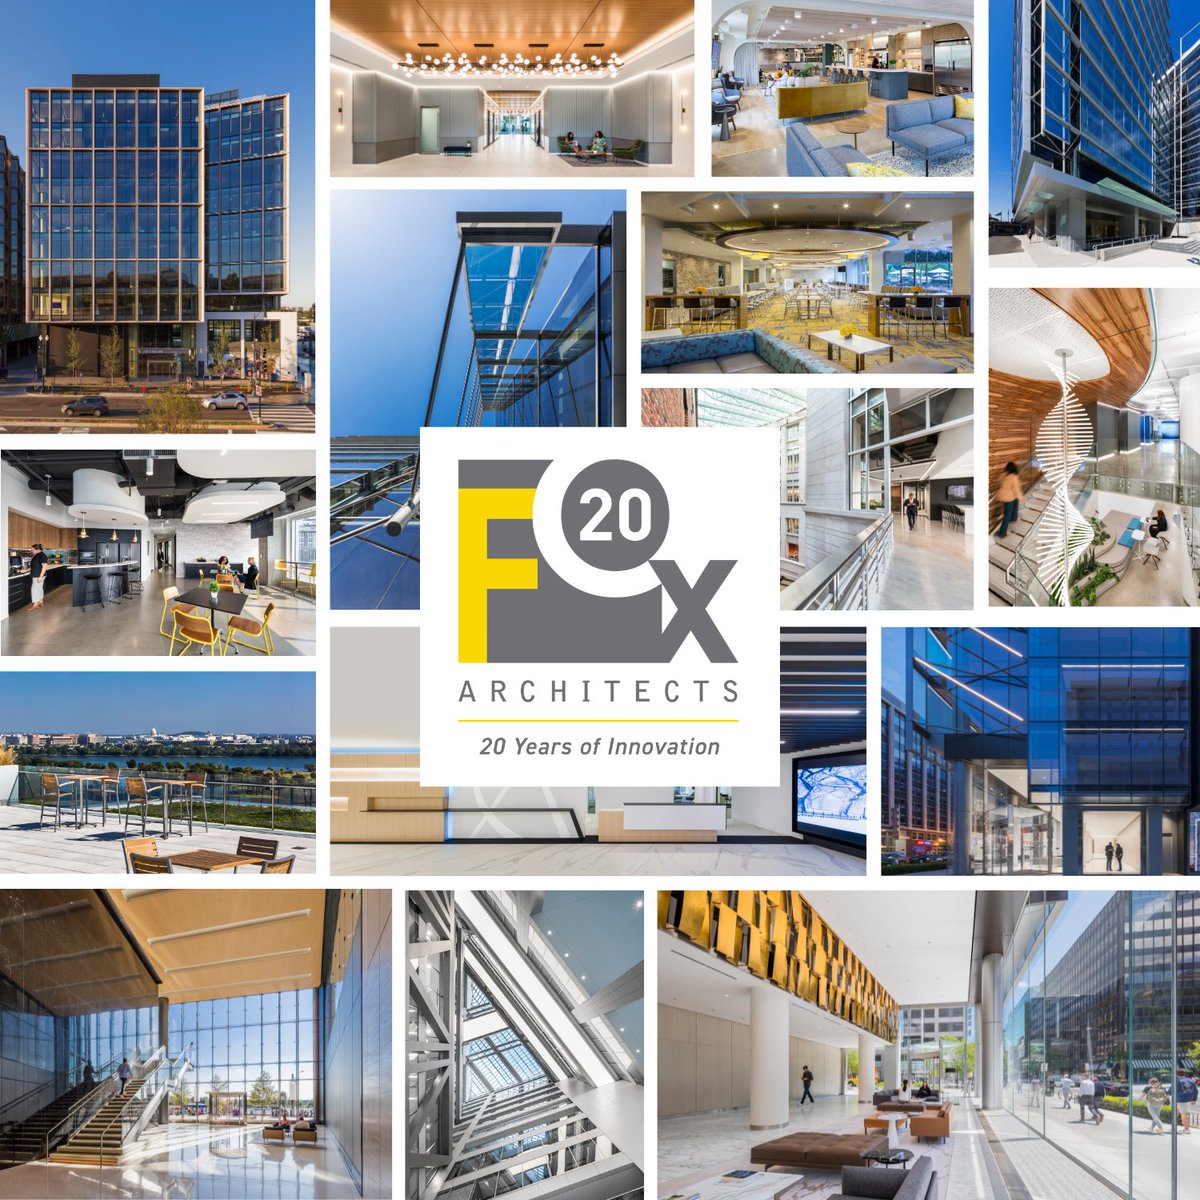 📣 We're thrilled to announce that FOX Architects has been recognized again as one of the top 10 firms in the Washington Business Journal’s List of Largest Interior Design Firms in Greater D.C.! #20YearsofInnovation #FOXArchitects #InteriorDesign #WashingtonDC #BookofLists